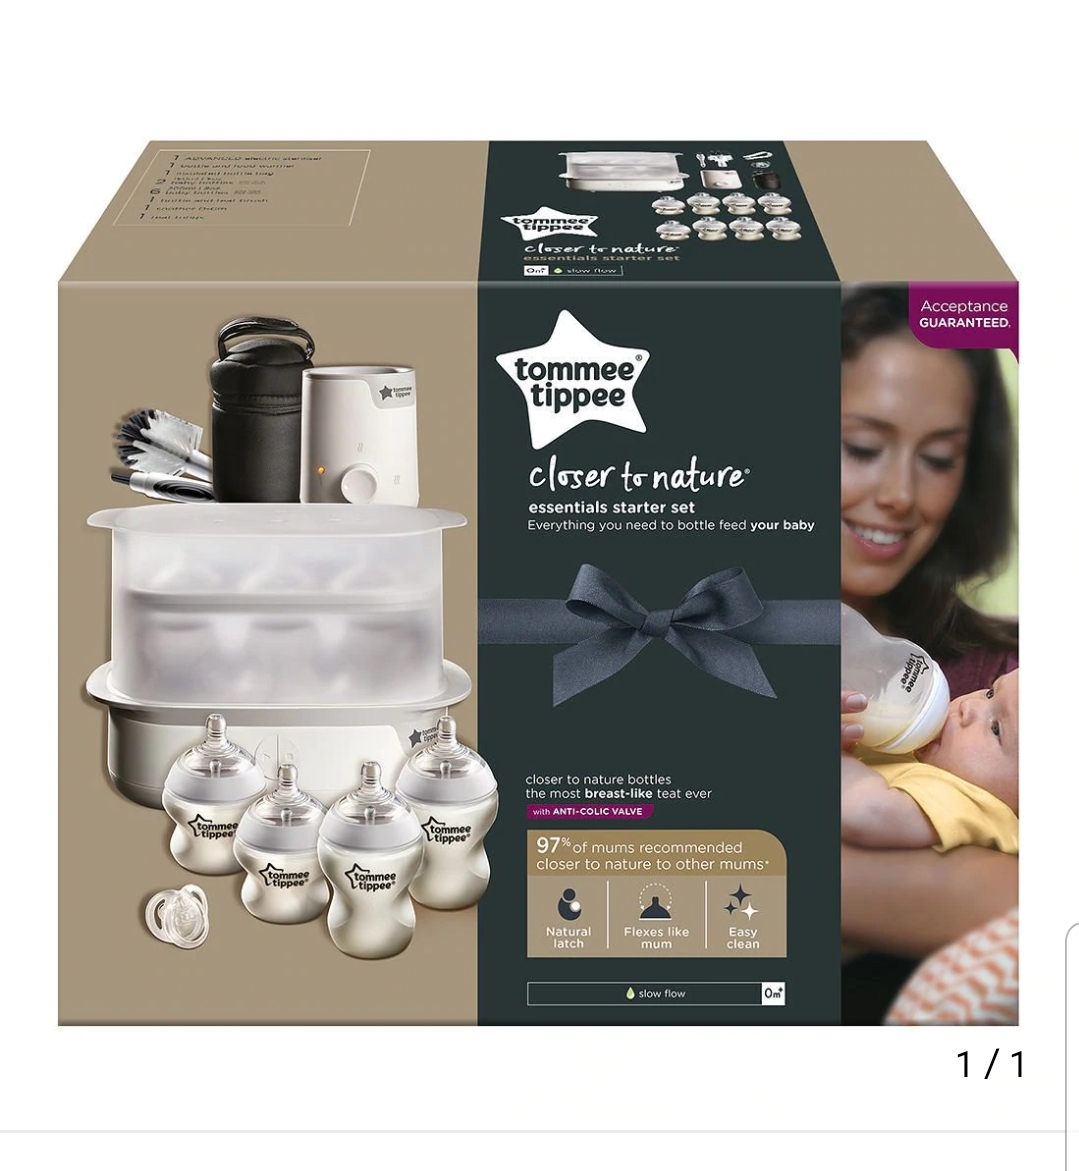 Tommee Tippee Closer to Nature Essentials Kit (White)